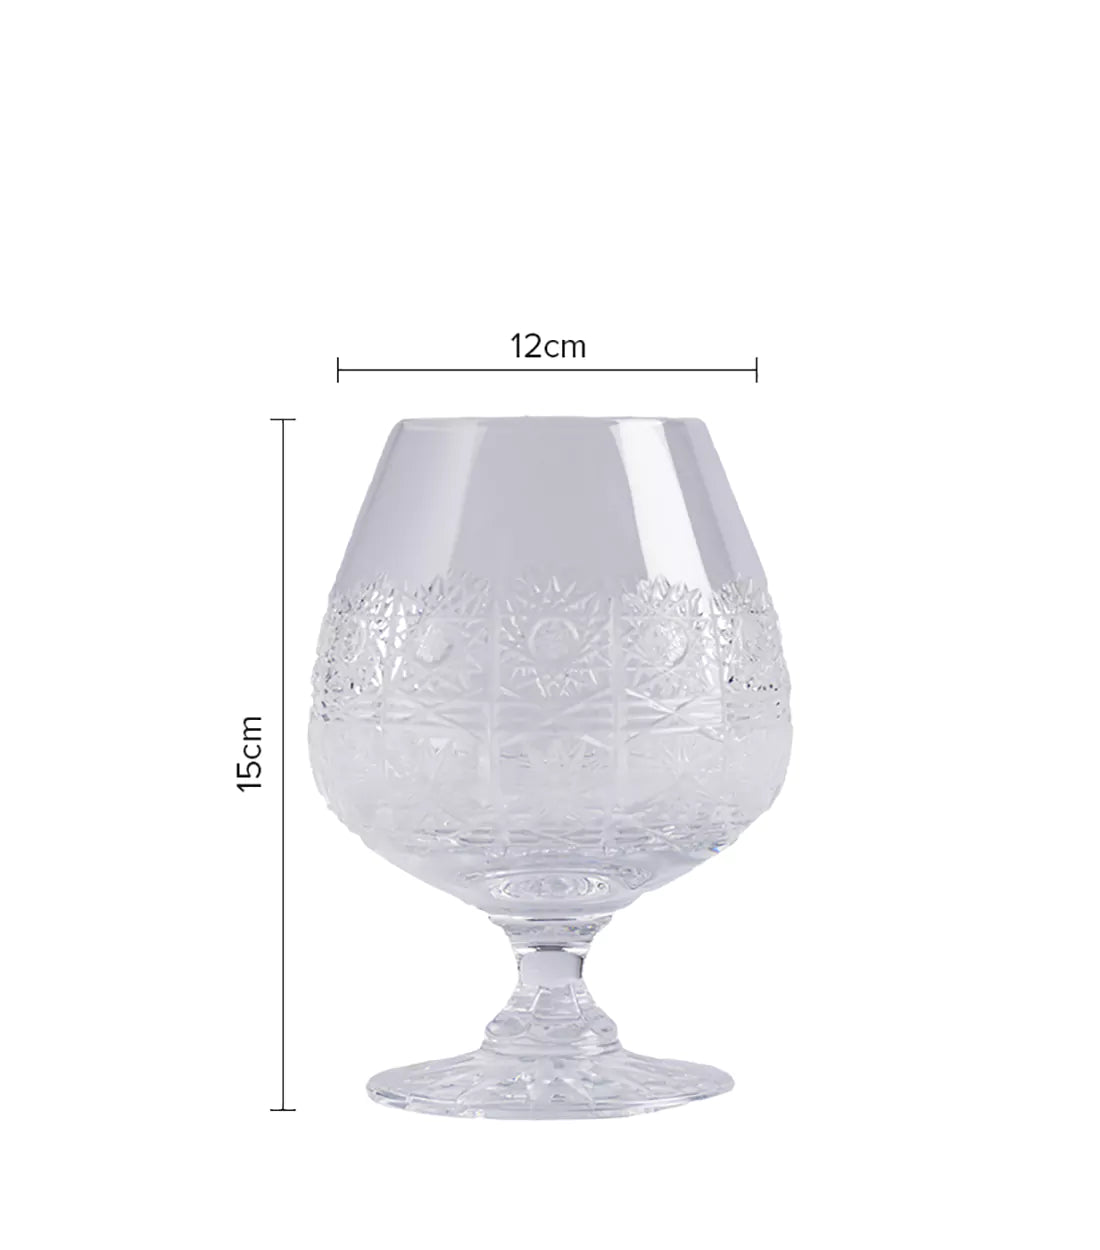 CAESAR CRYSTAL BOHEMIAE - Elysium Crystal Glass - Handcrafted crystal glass with intricate patterns and cuttings.